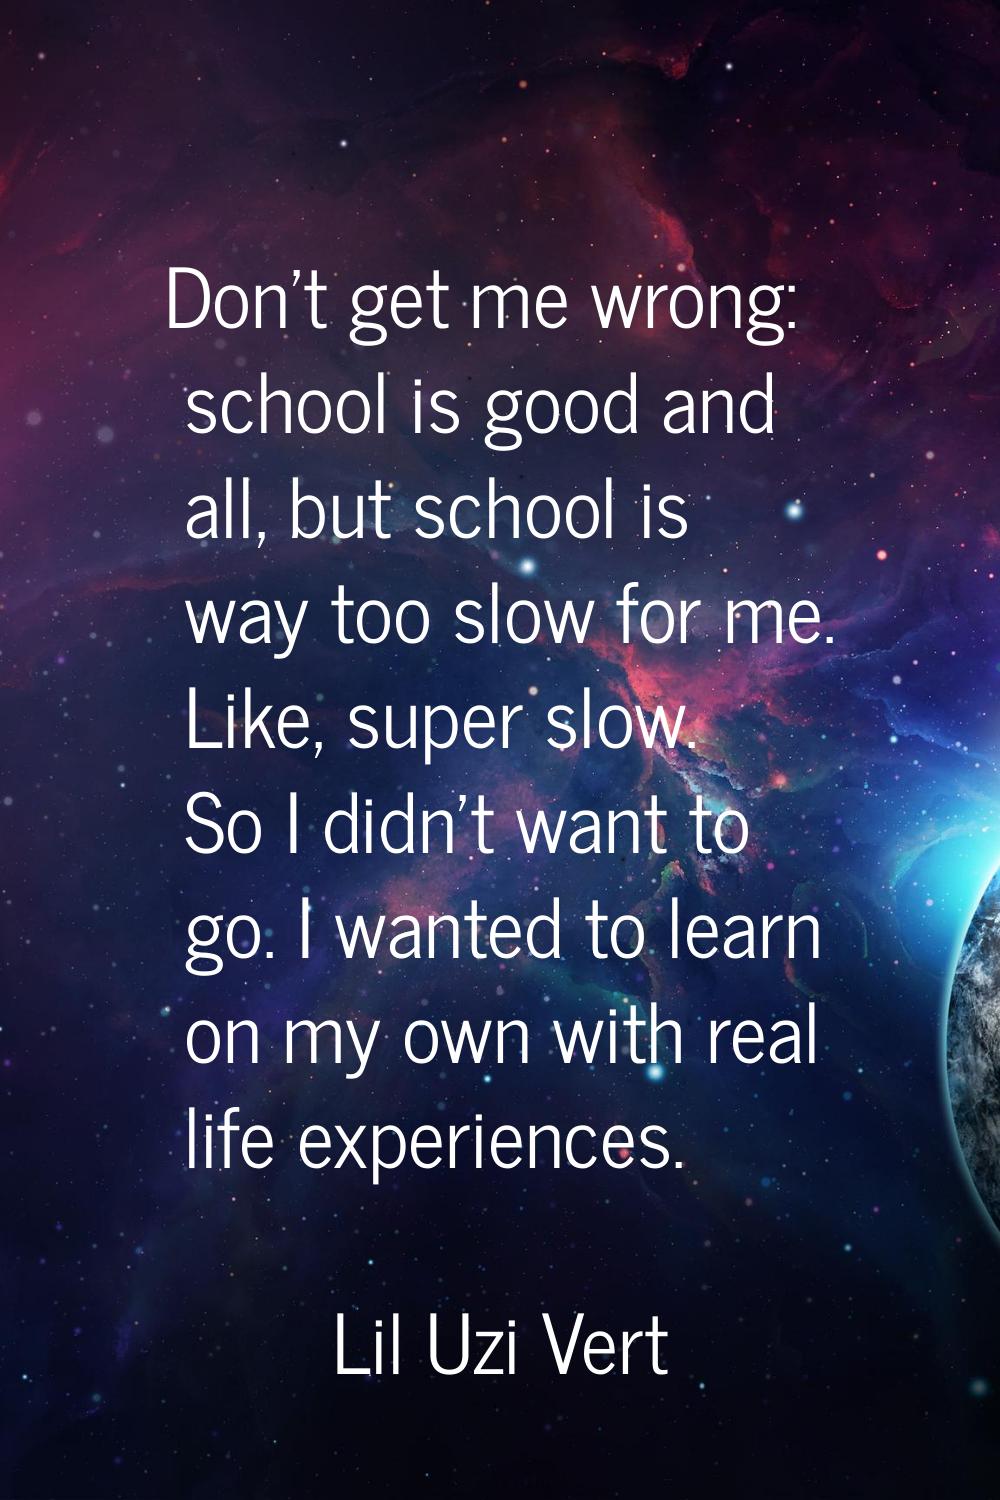 Don't get me wrong: school is good and all, but school is way too slow for me. Like, super slow. So